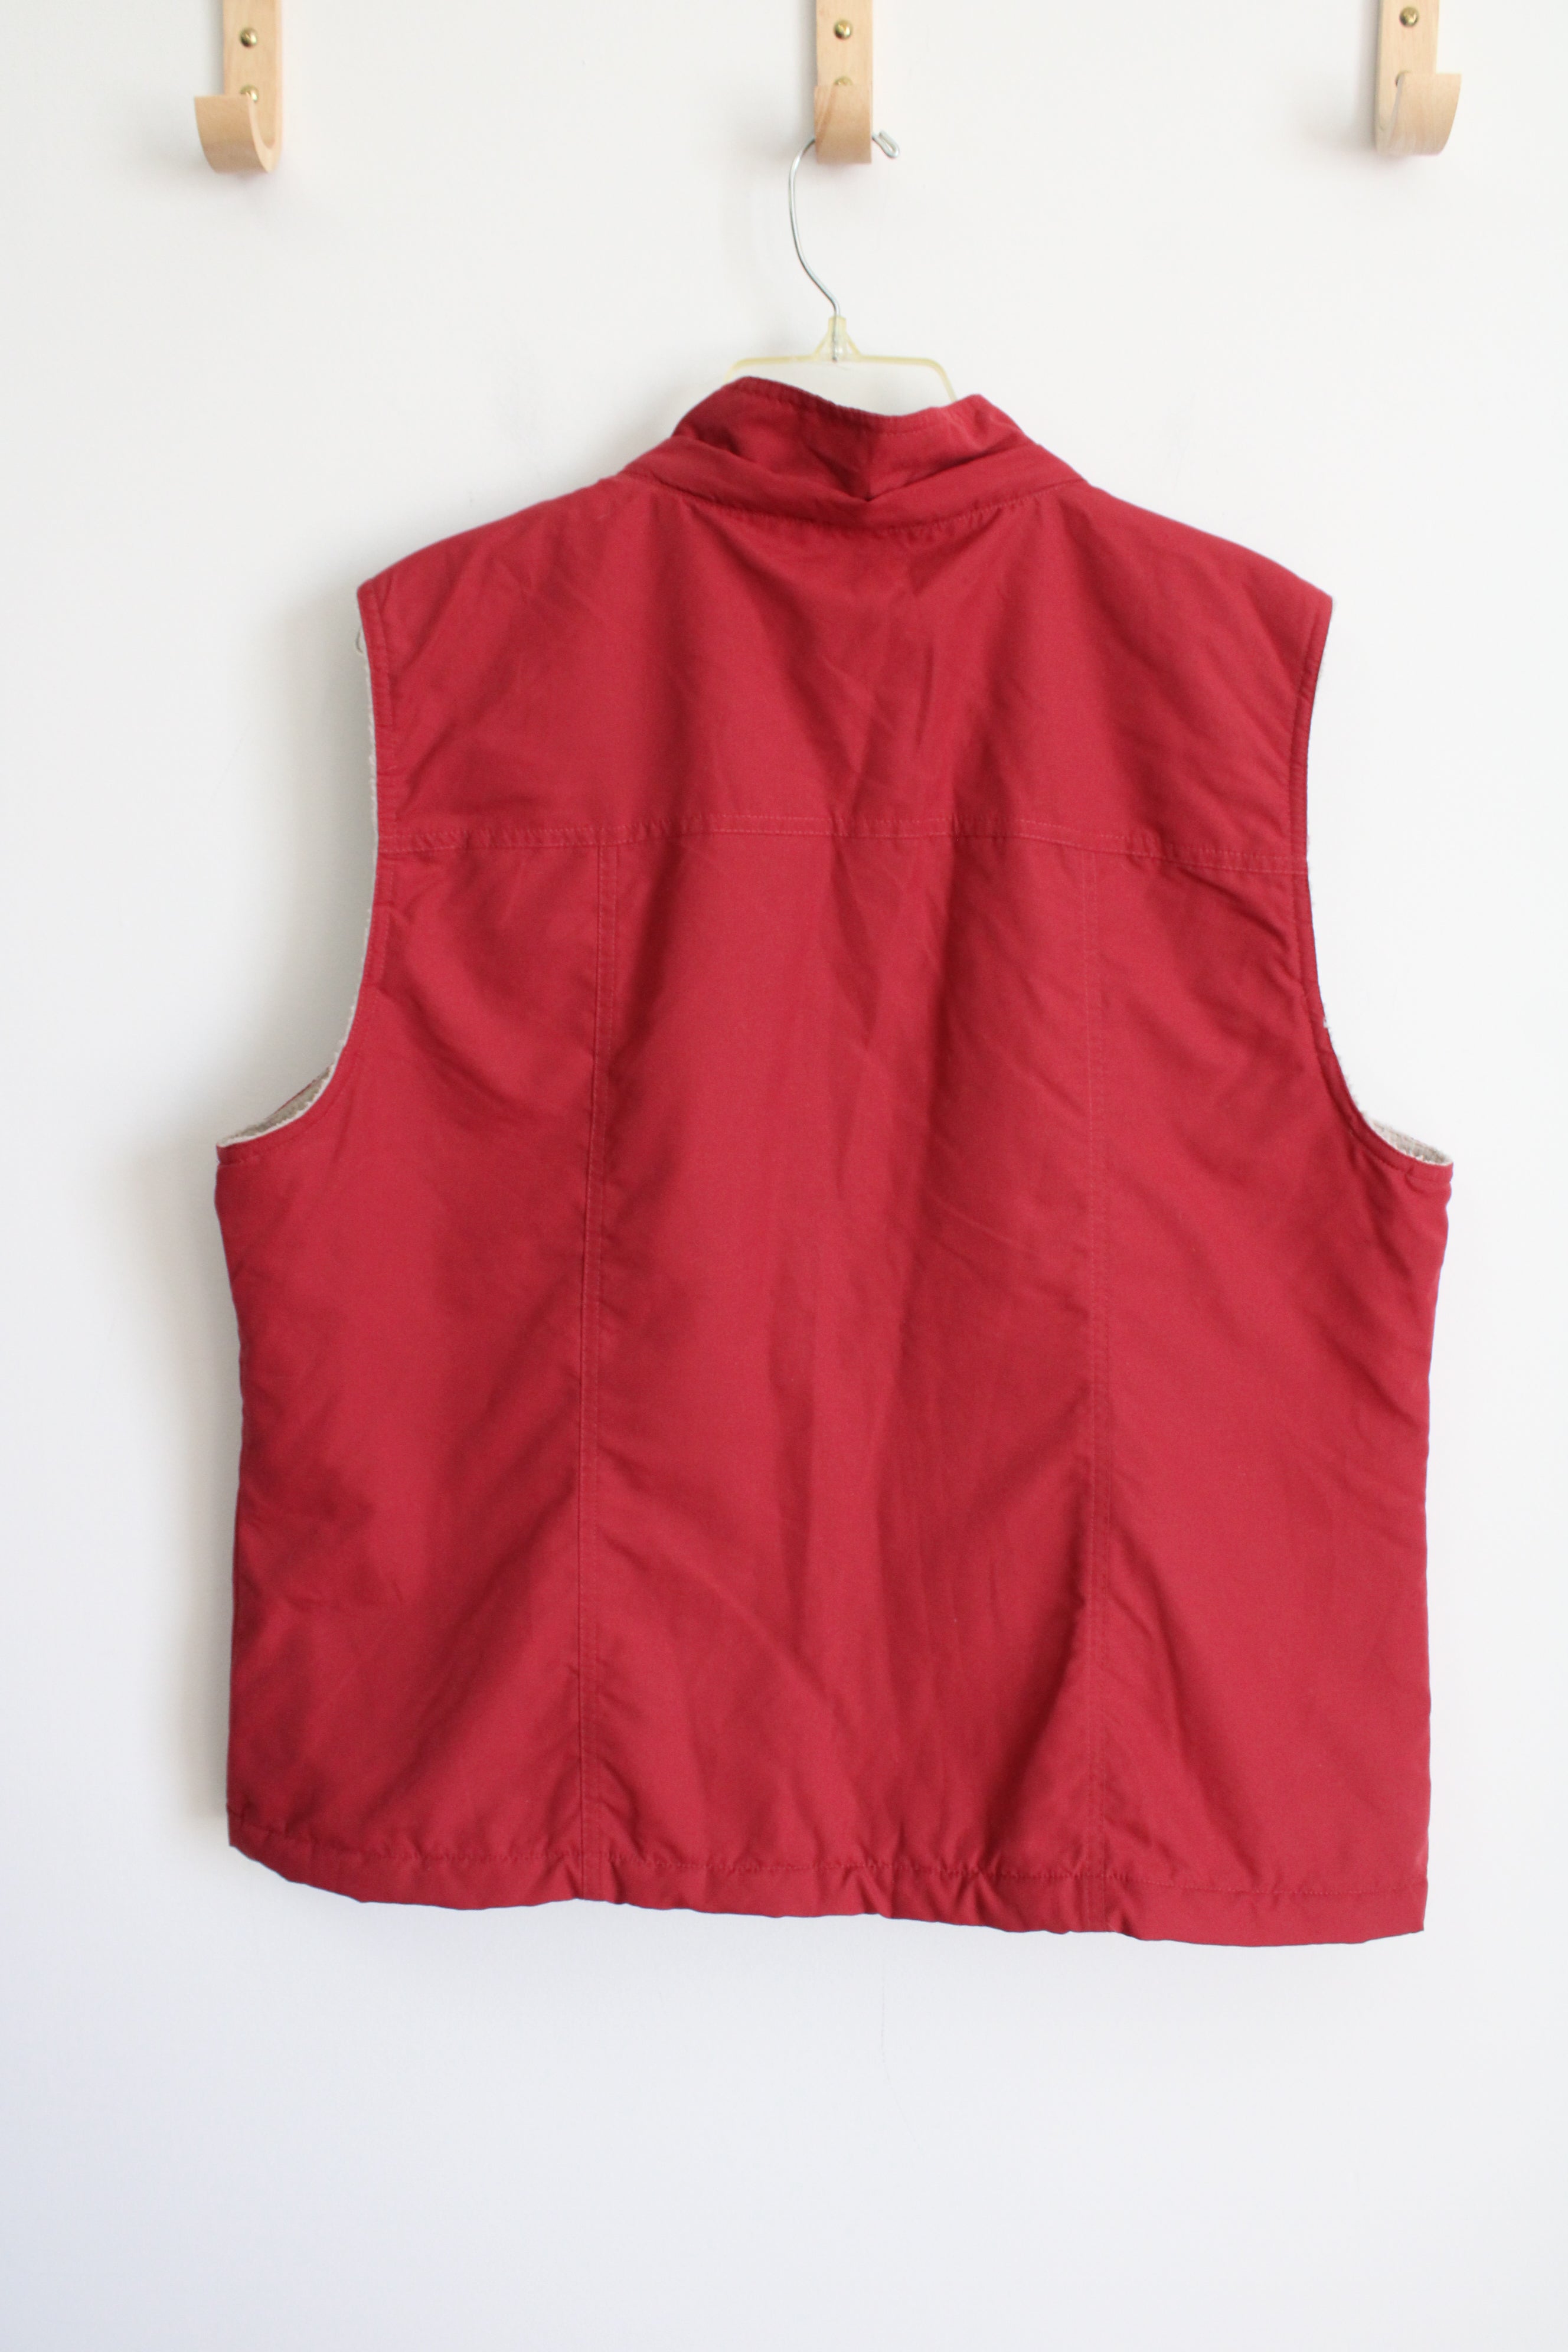 Sonoma Red Sherpa Lined Vests | XL